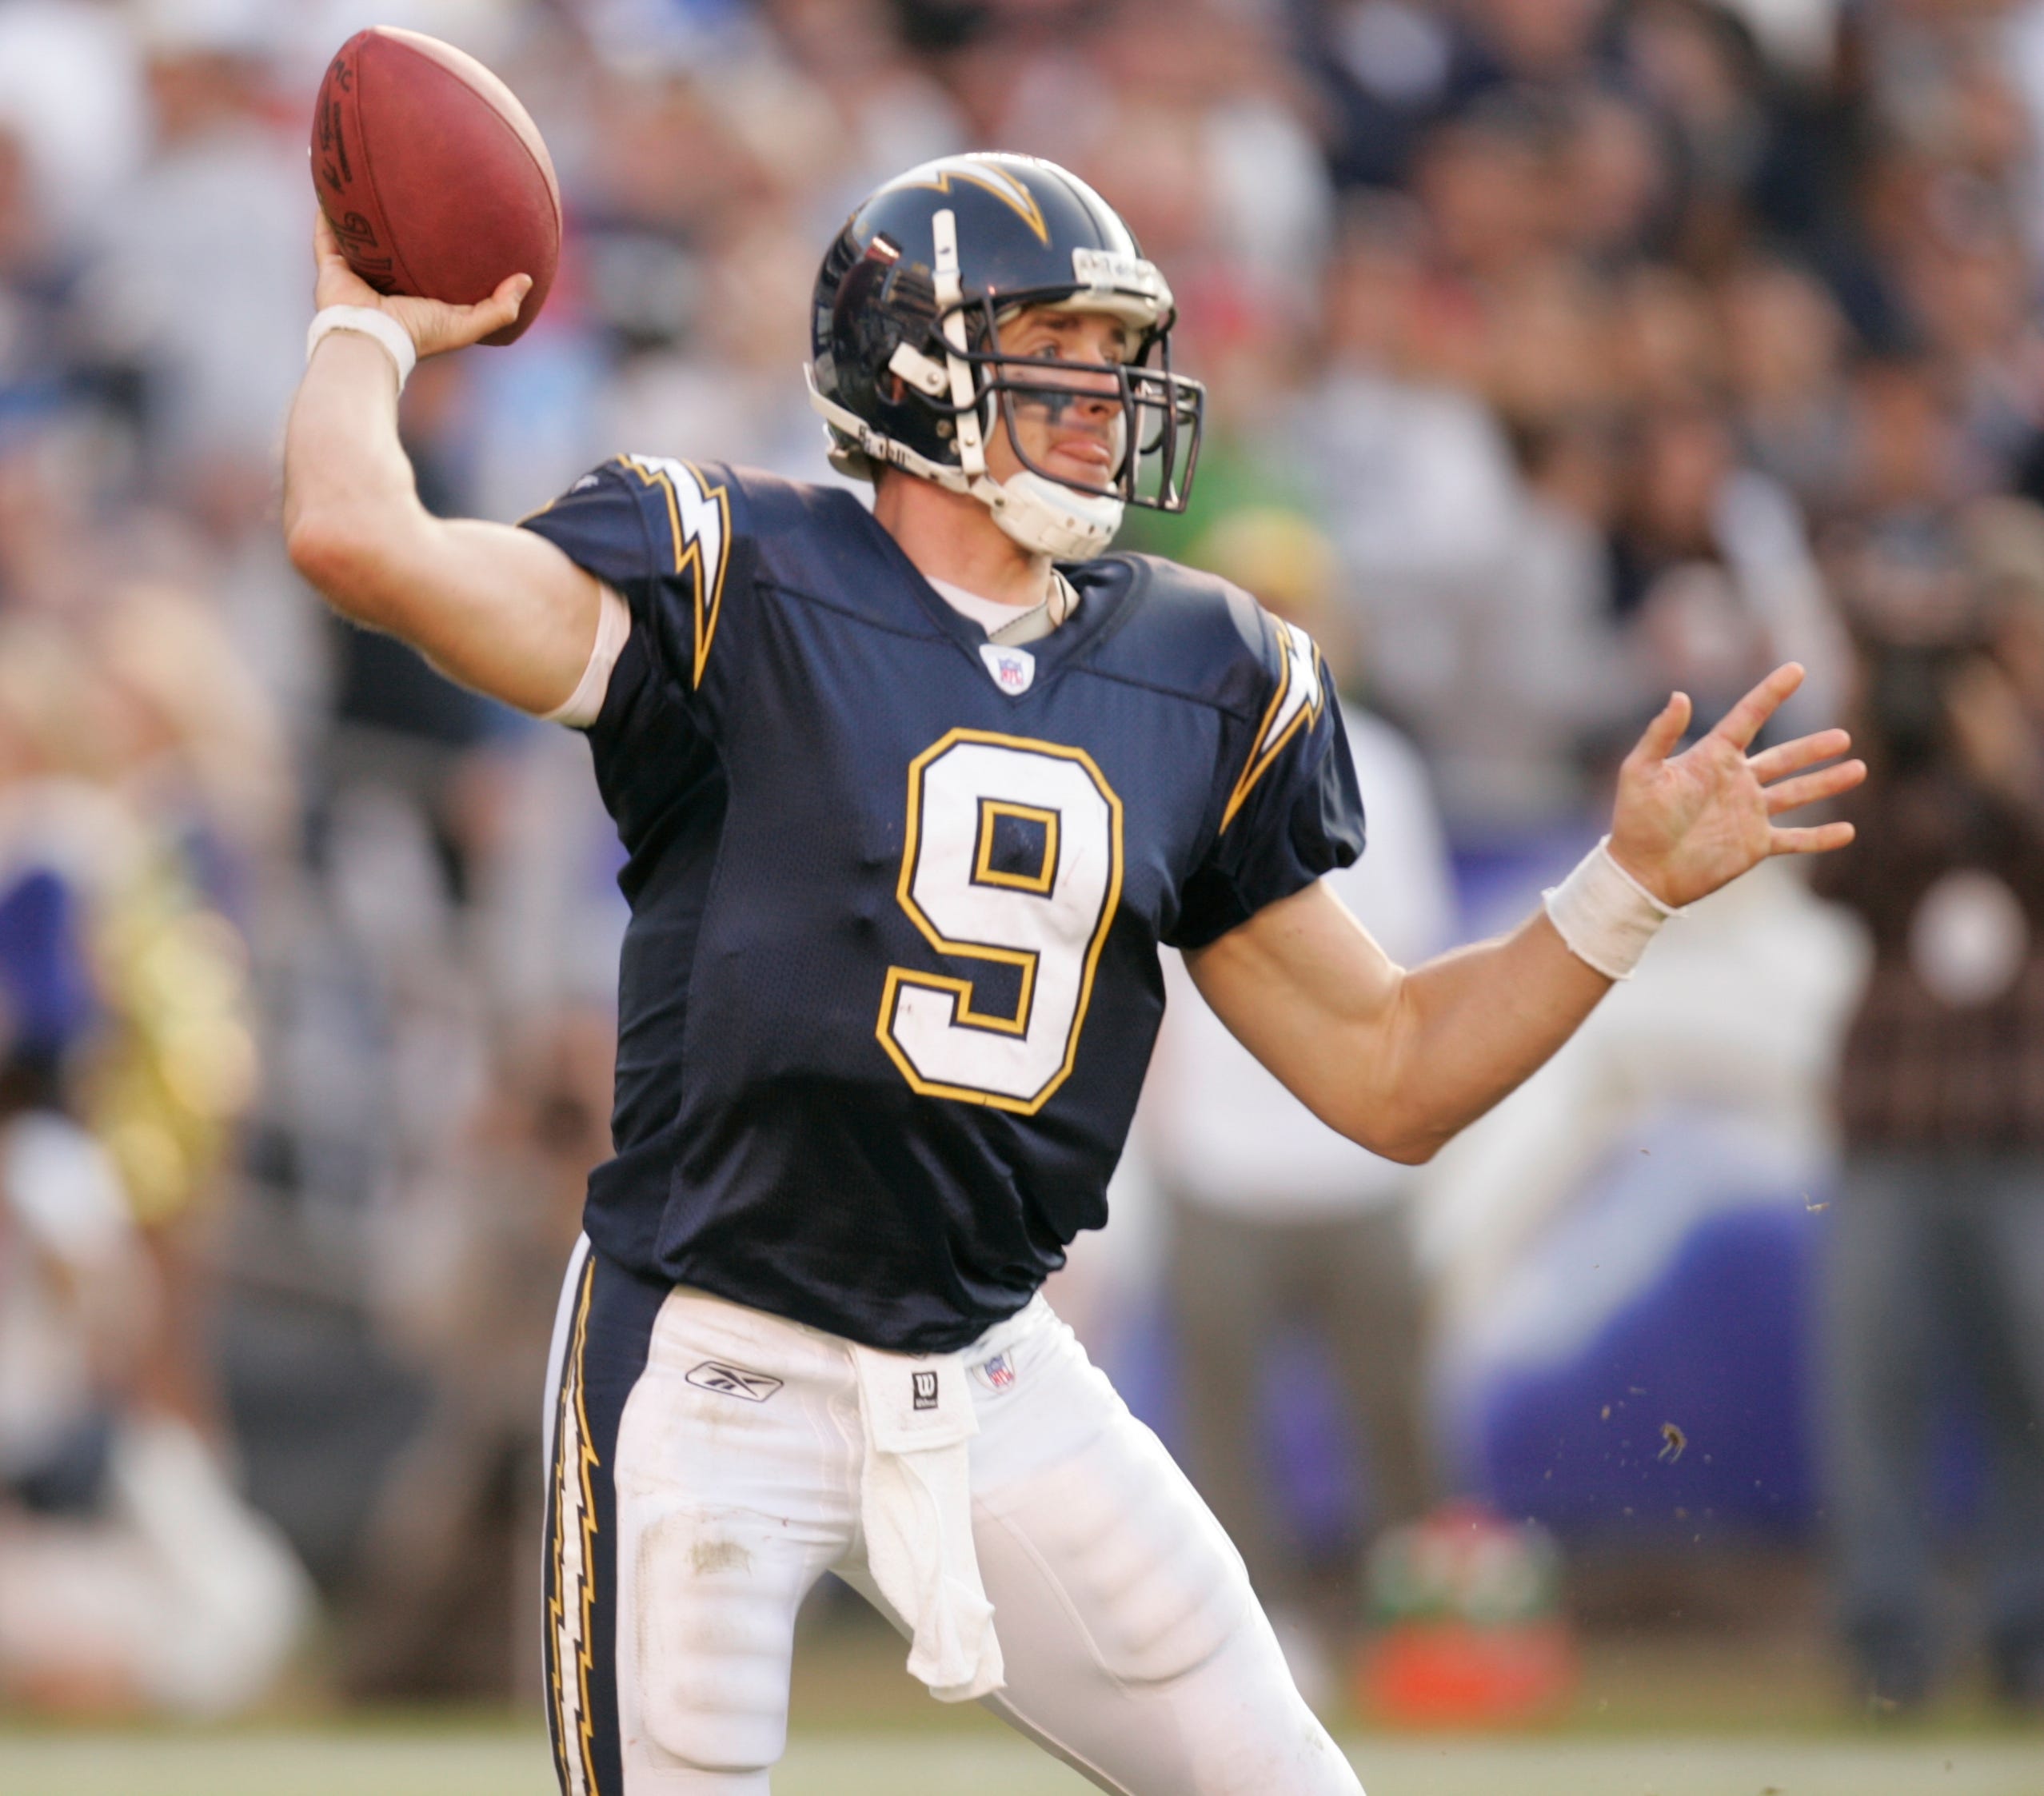 Drew Brees: Chargers' 2004 draft of QB 